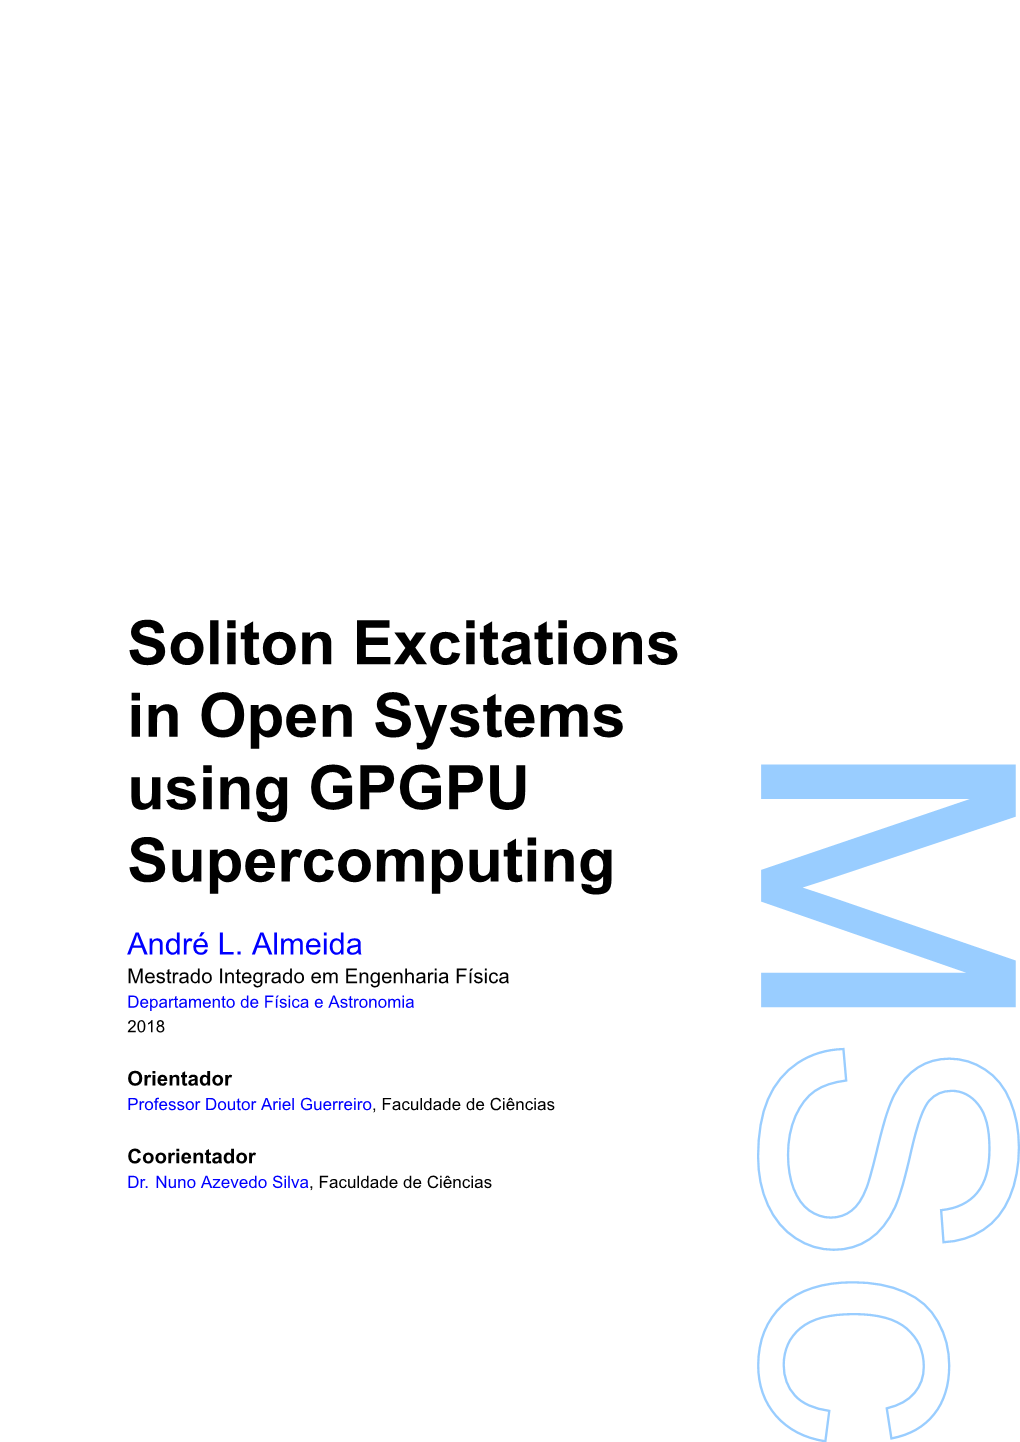 Soliton Excitations in Open Systems Using GPGPU Supercomputing